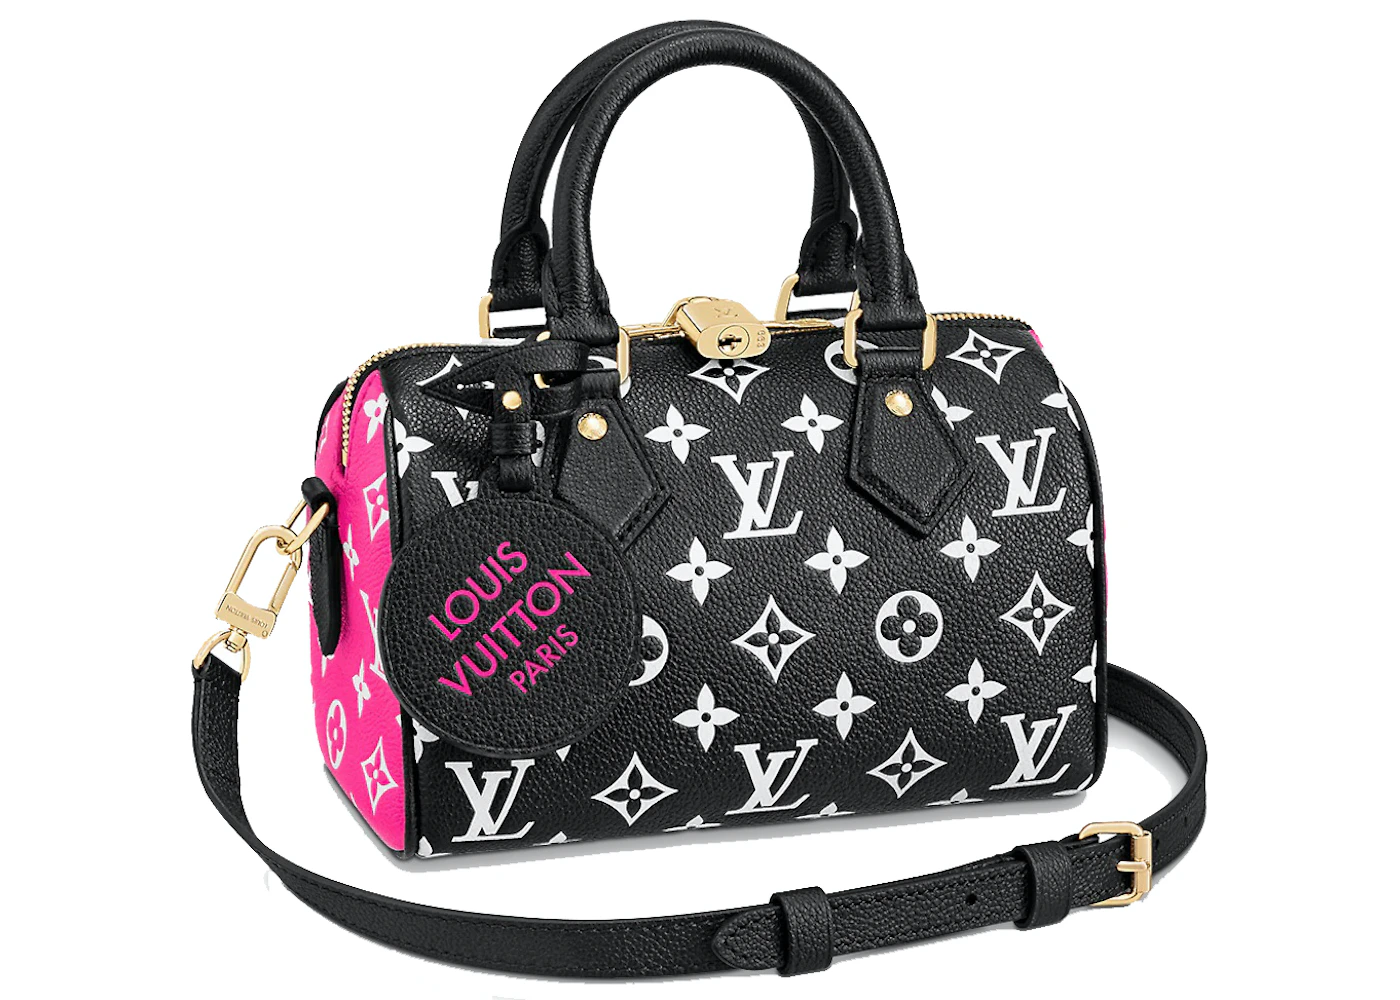 Louis Vuitton Speedy Bandouliere 20 Black/White in Cowhide Leather